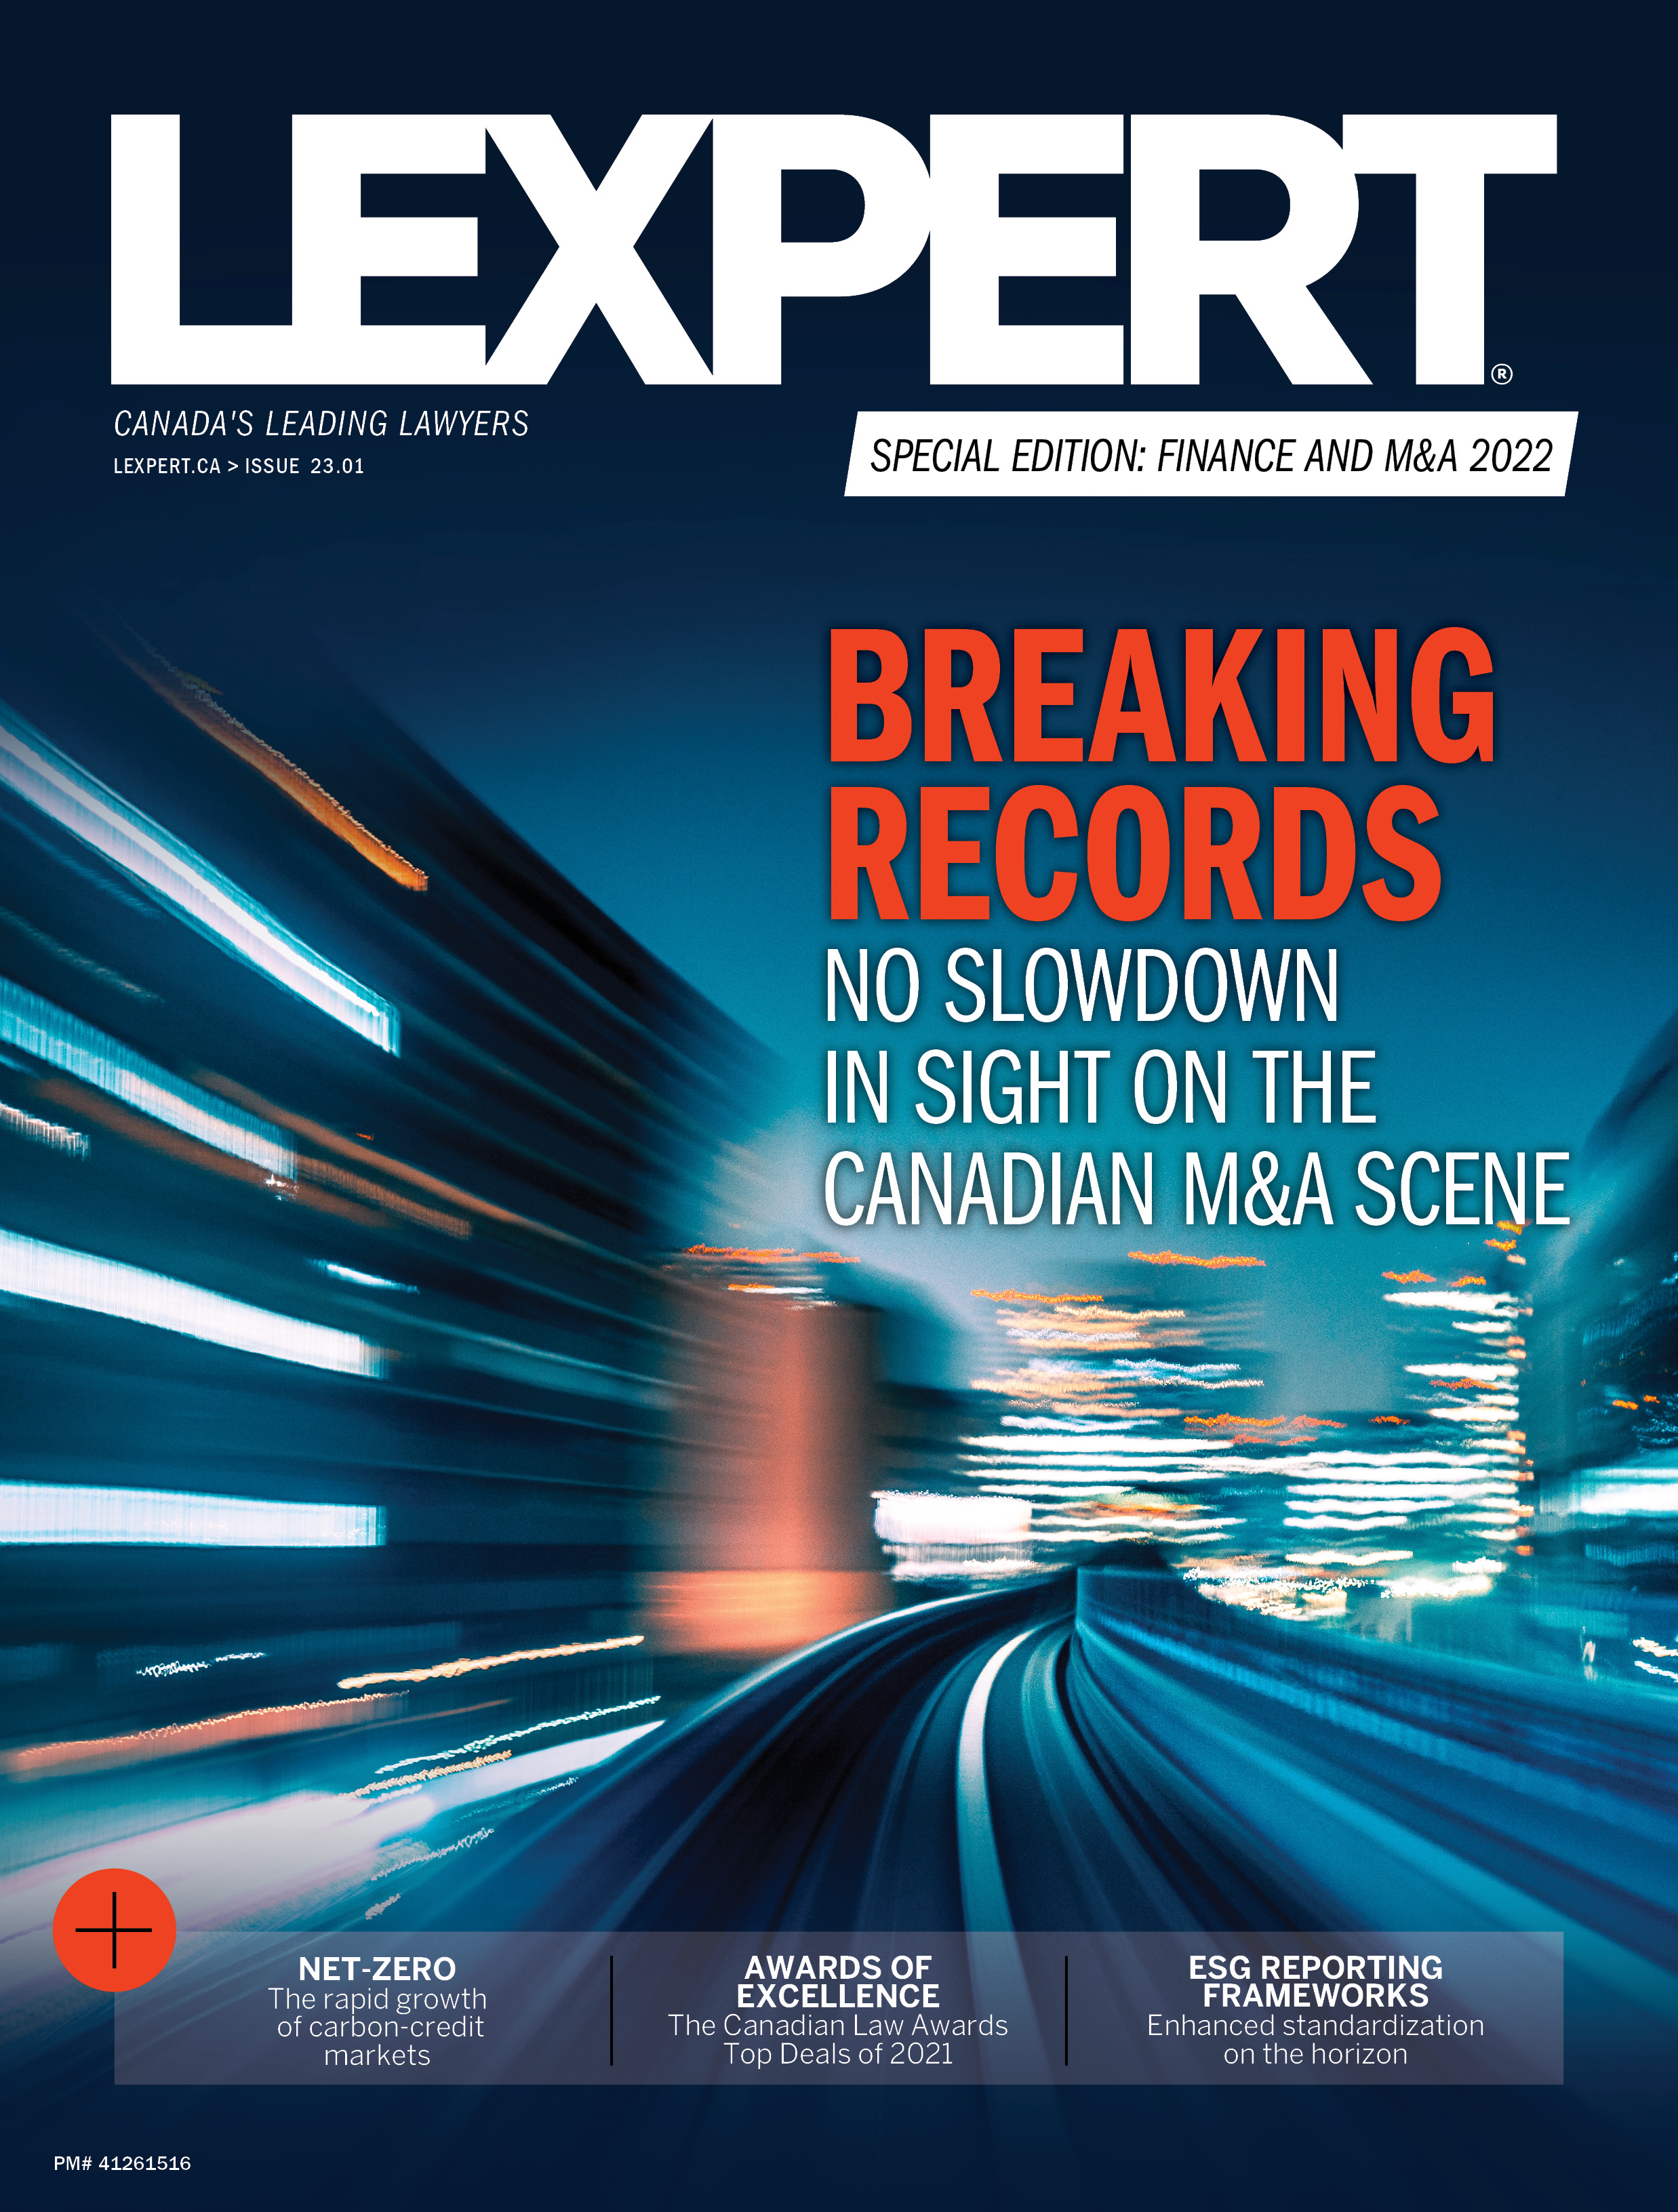 The Lexpert Special Edition: Finance and M&A 2022